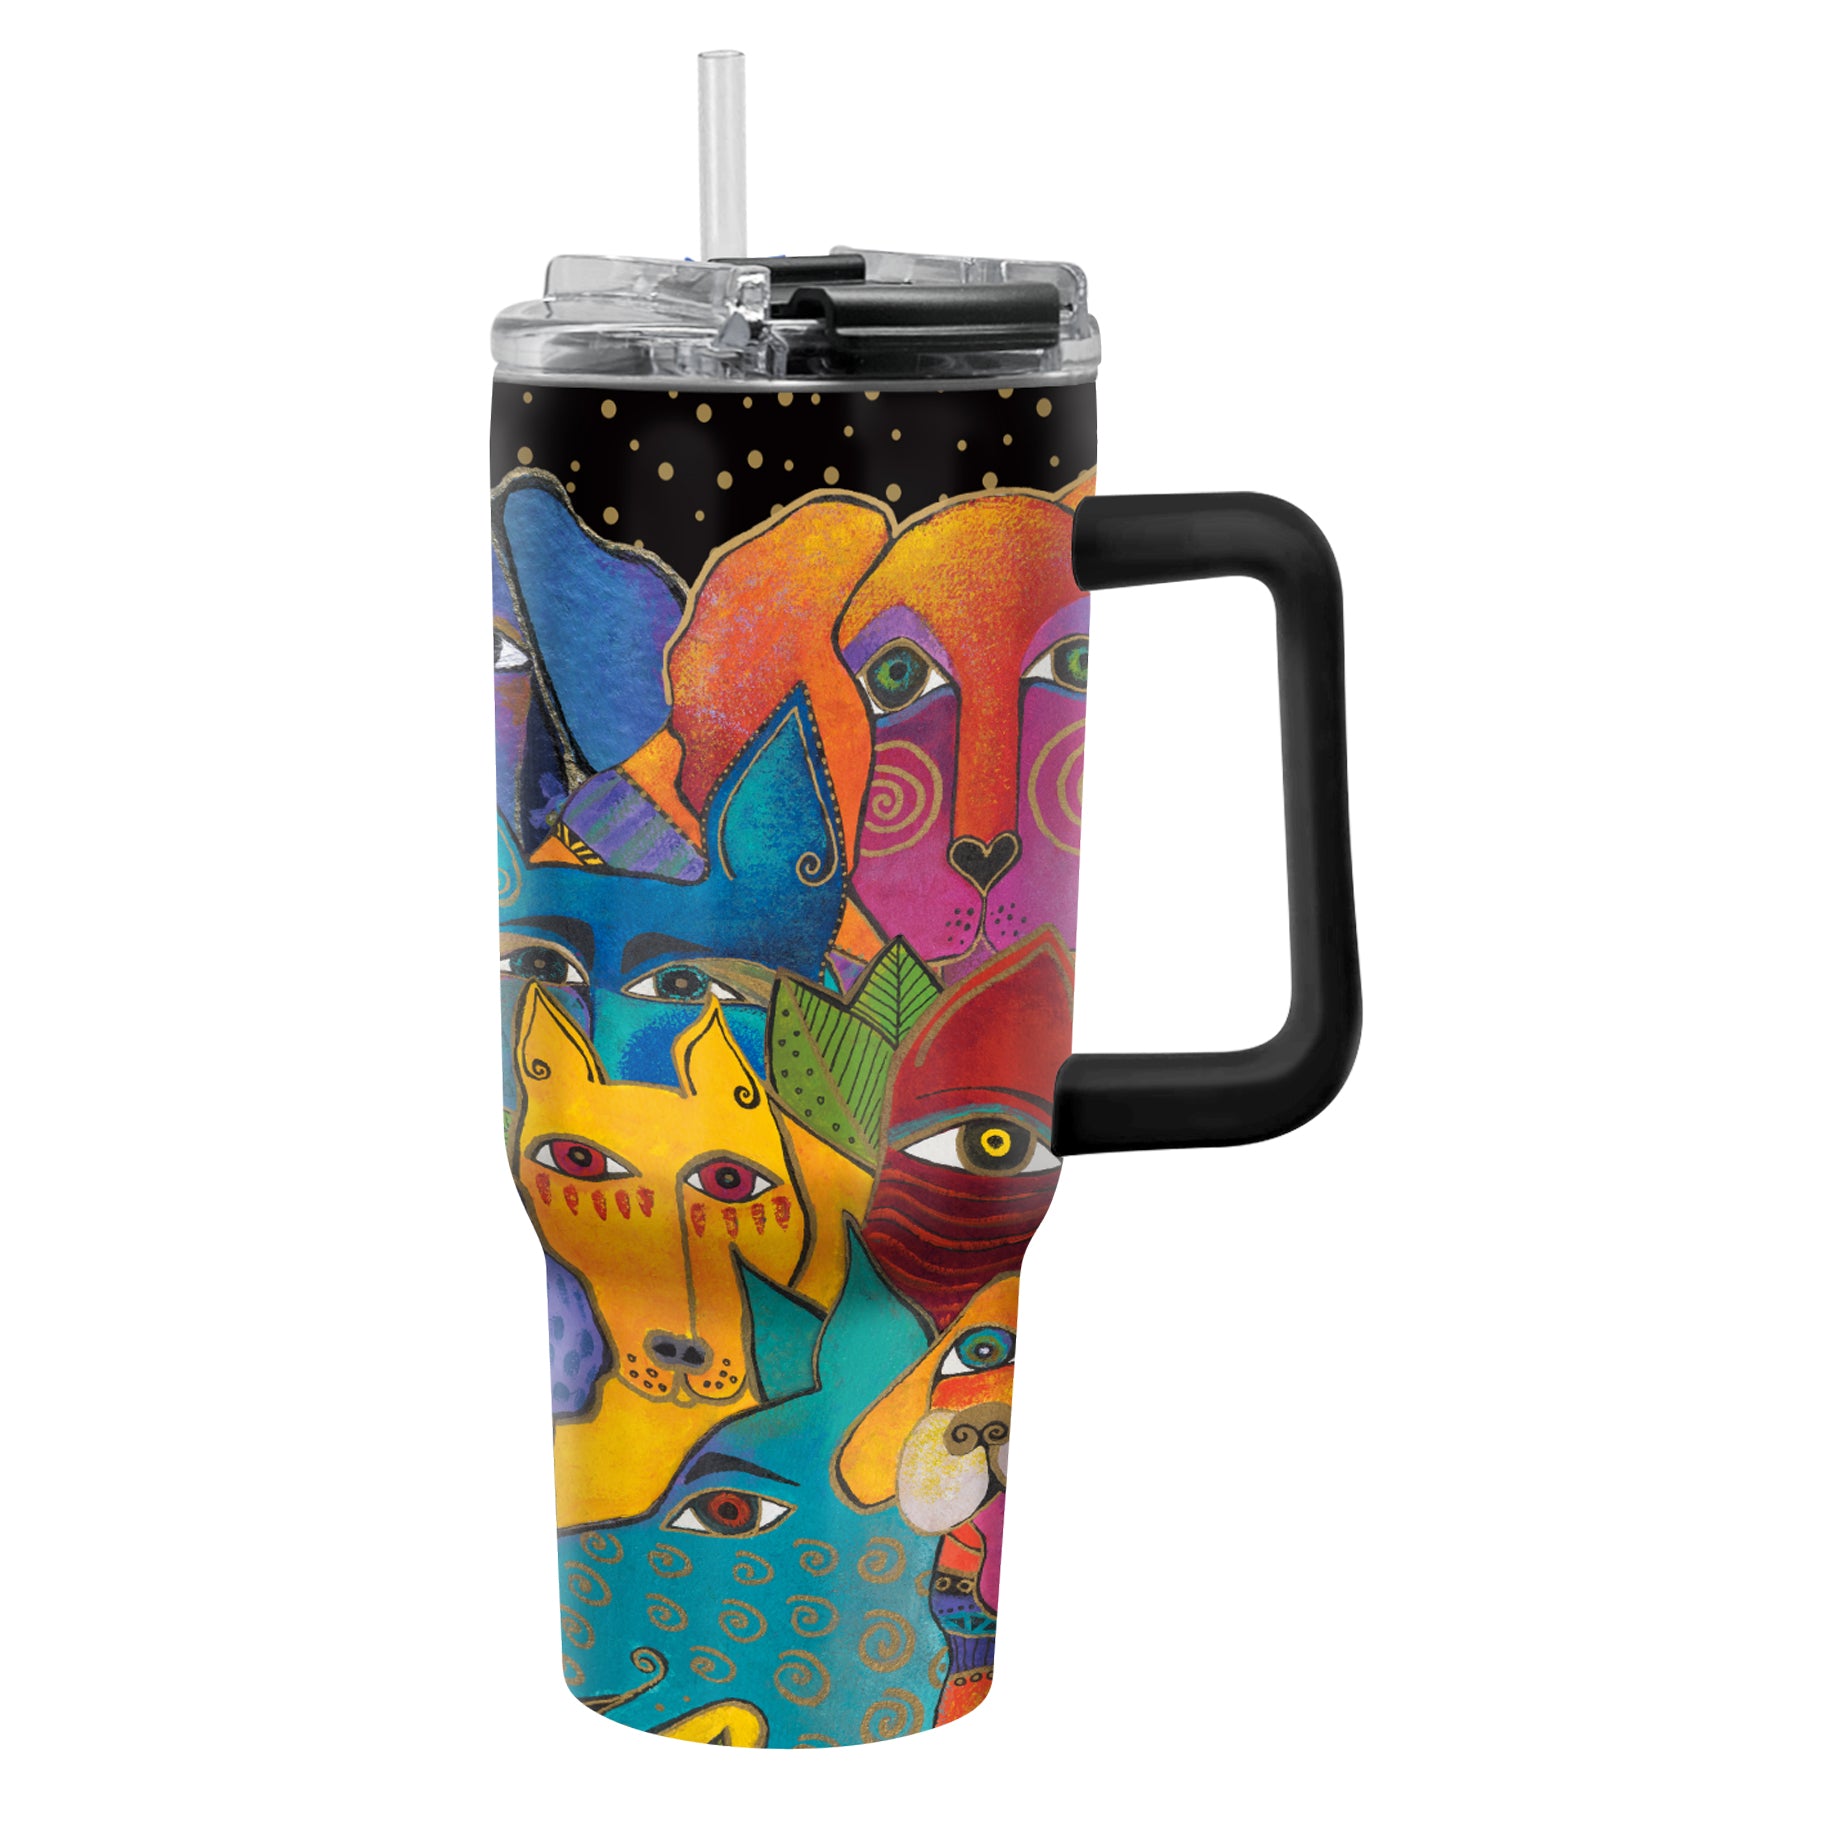 Tumbler 30oz - LB "Dogs, Dogs, Dogs"